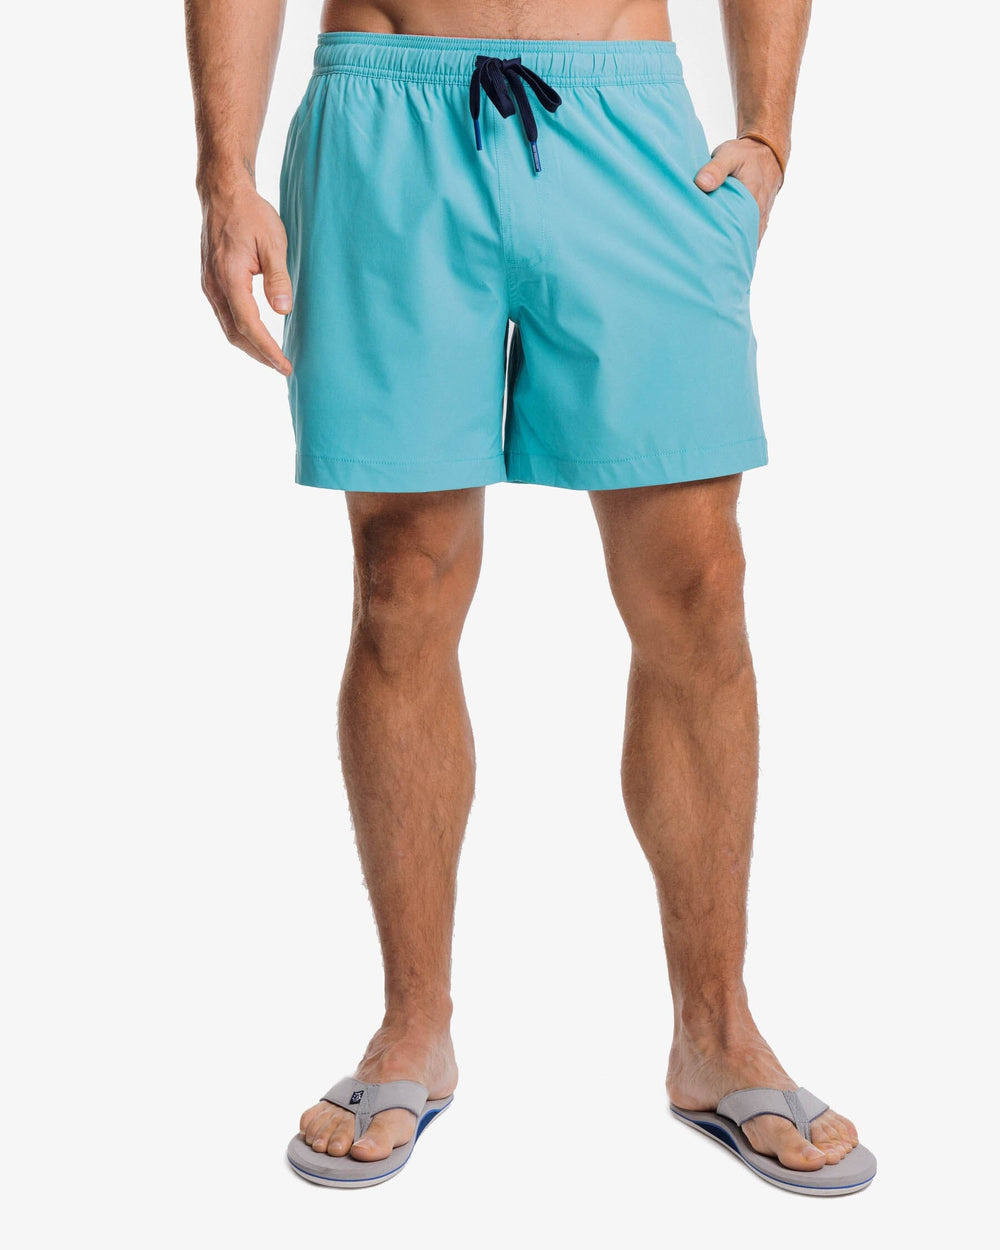 The front view of the Southern Tide Solid Swim Trunk 3 by Southern Tide - Tidal Wave